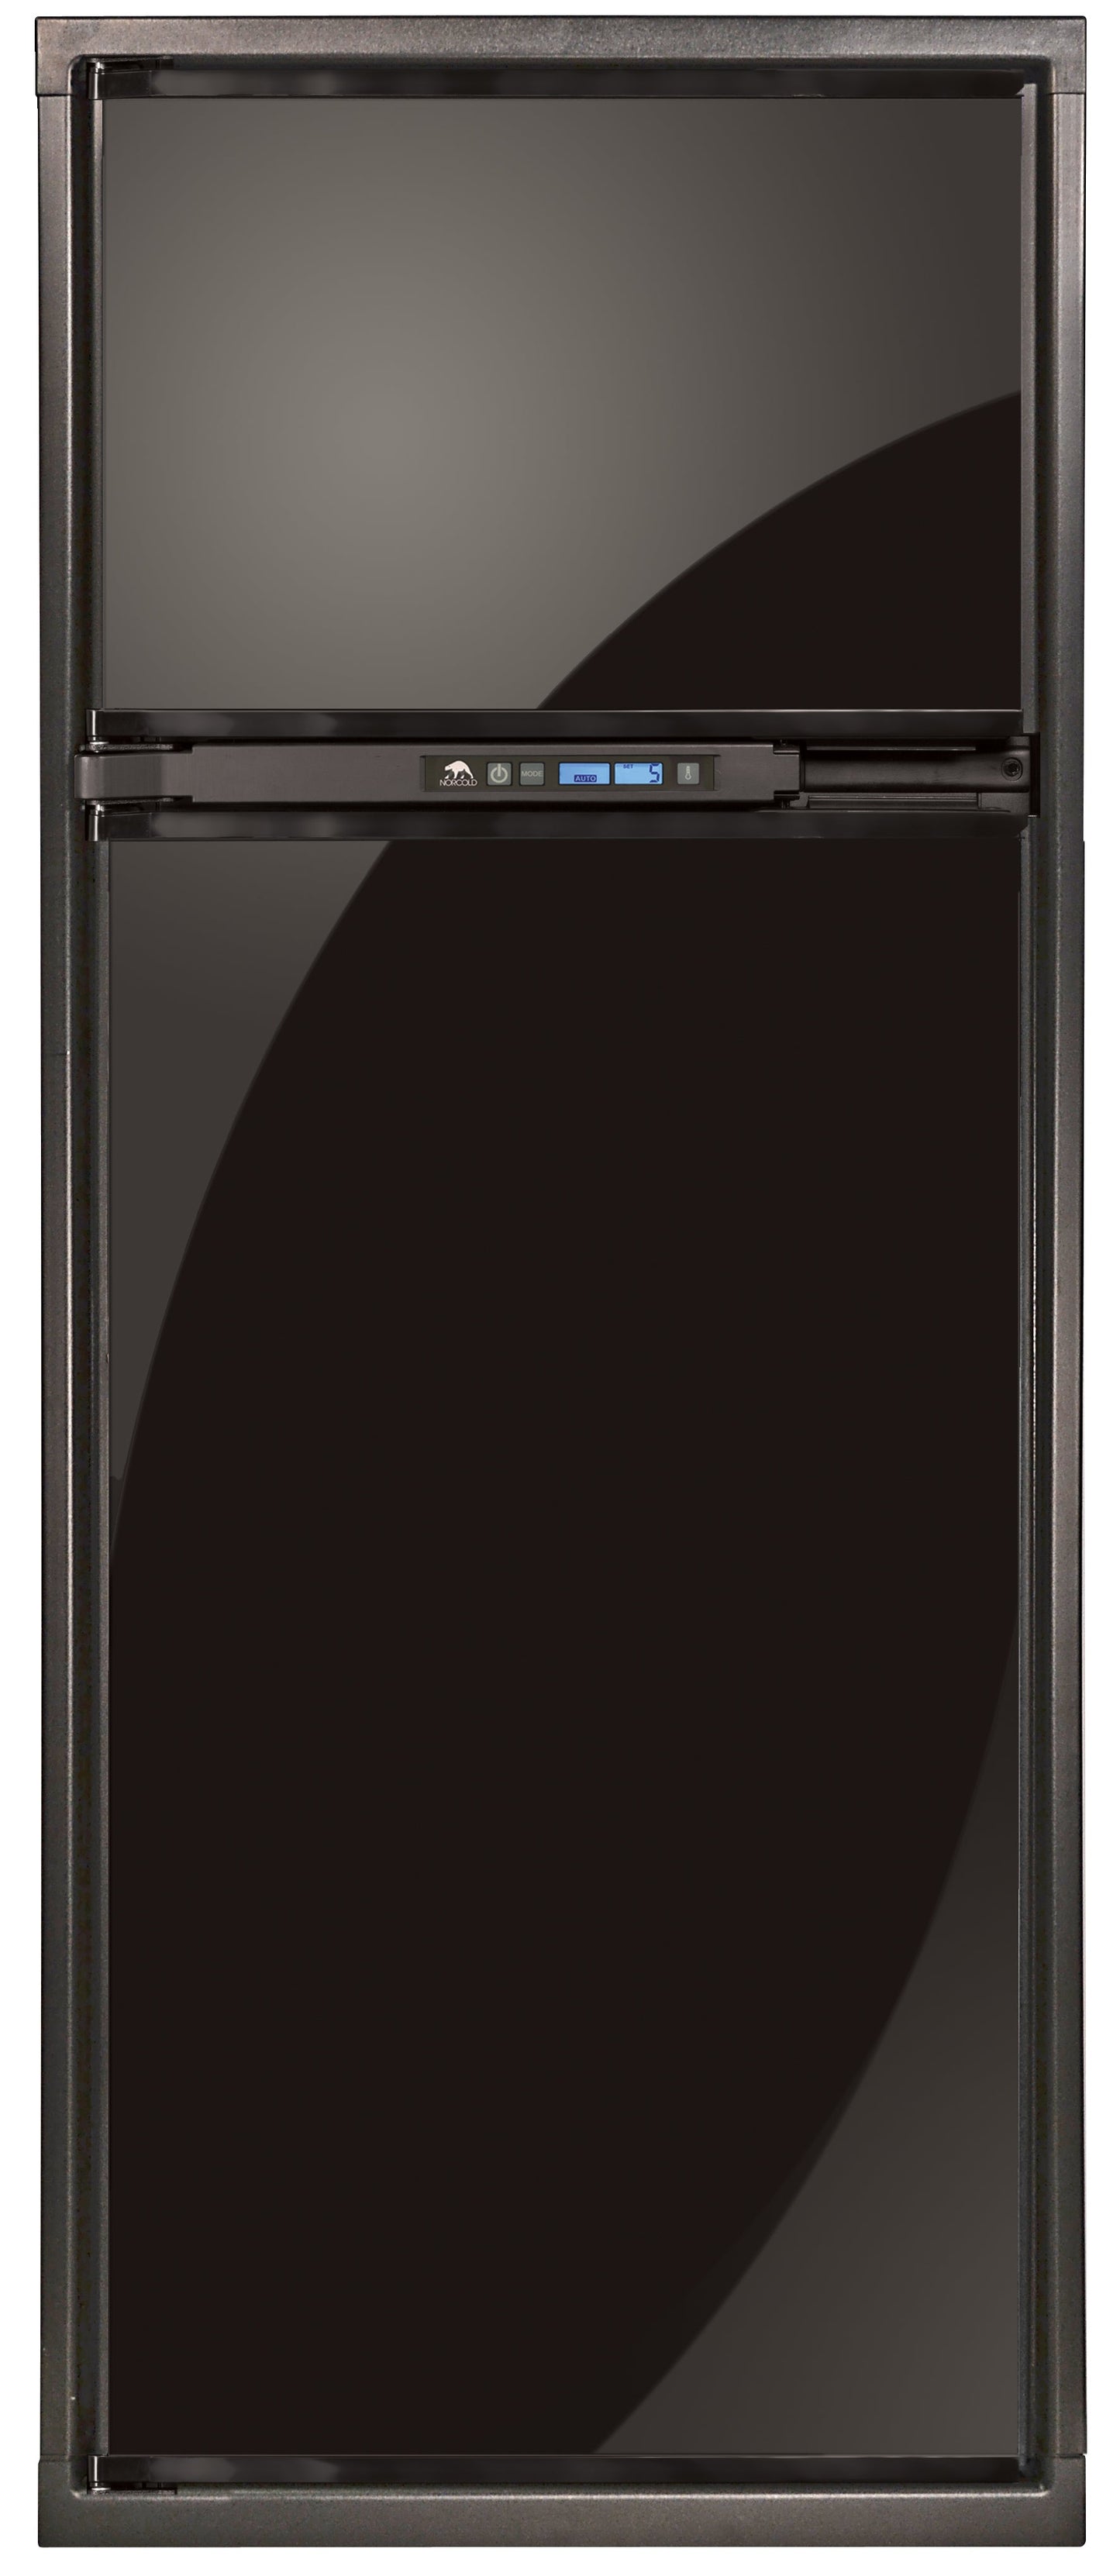 Norcold NA8LX.3R Dual Compartment 2 Door Refrigerator With Freezer - N6DNA8LX3R